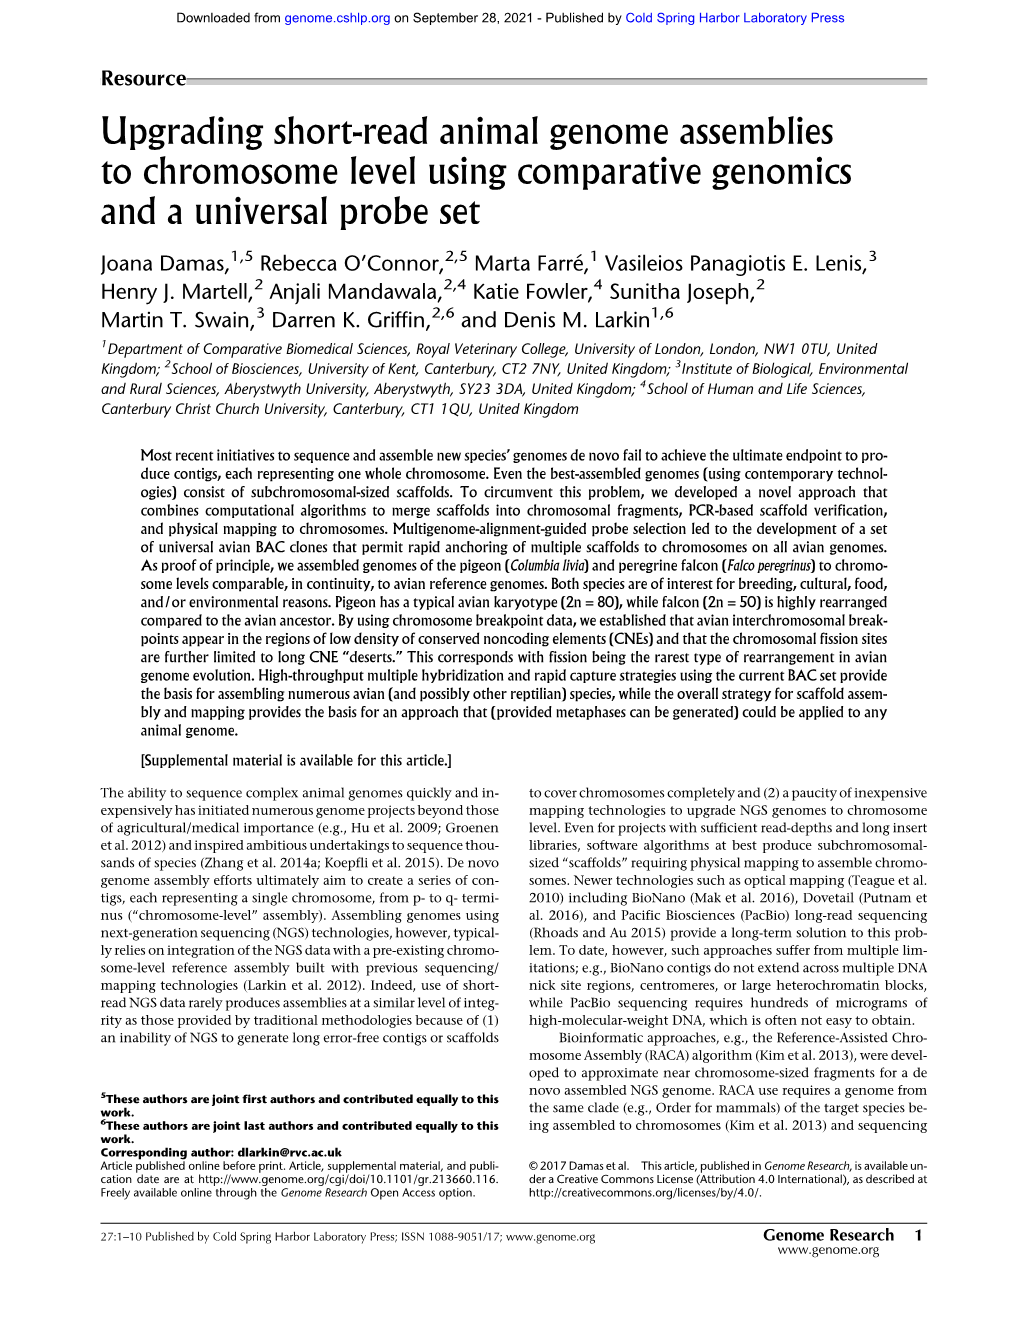 Upgrading Short-Read Animal Genome Assemblies to Chromosome Level Using Comparative Genomics and a Universal Probe Set